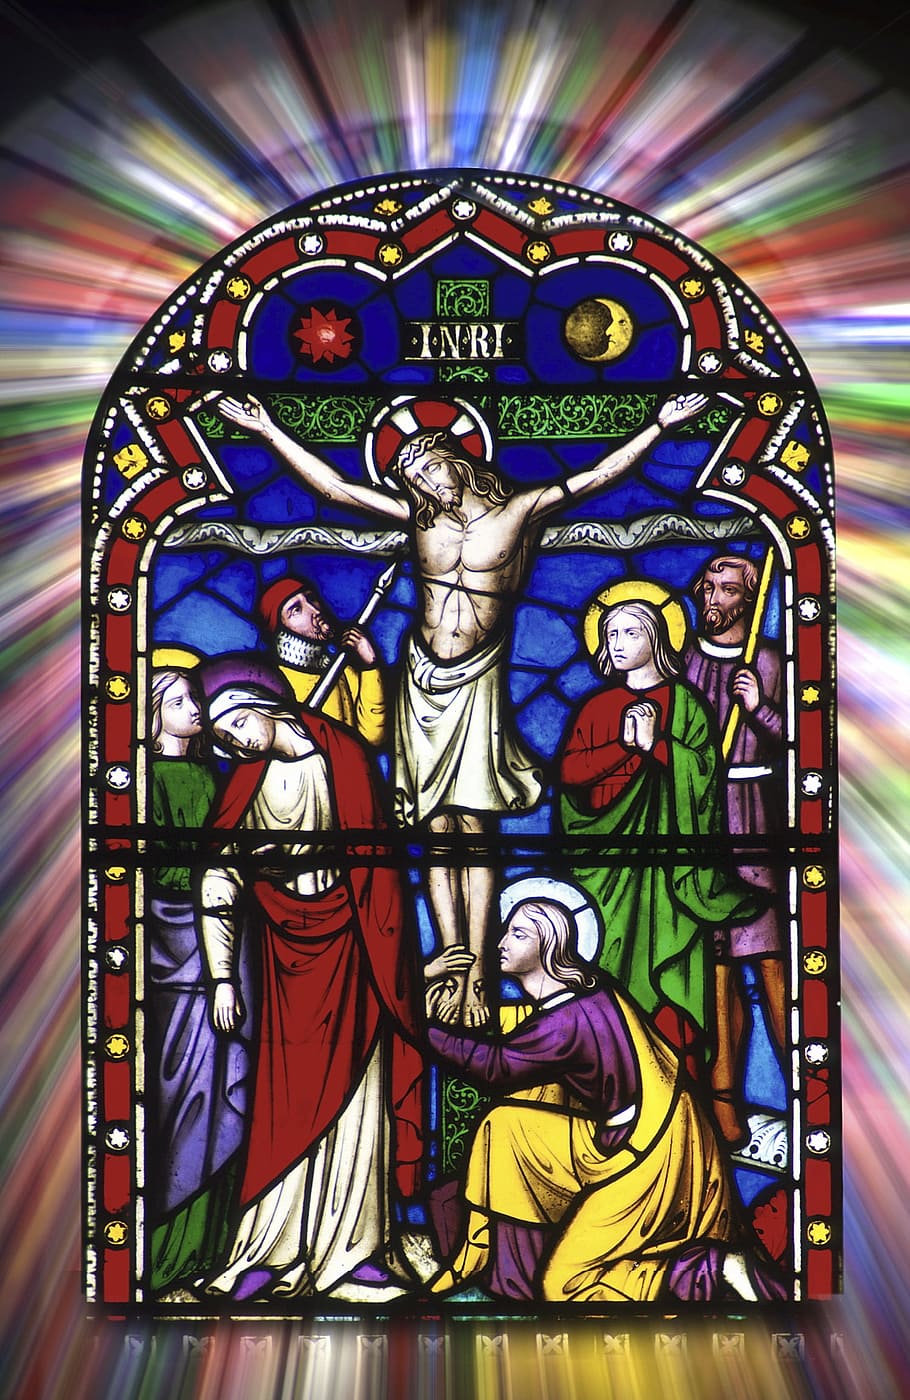 jesus christ artwork, Stained Glass, Religious, Christian, jesus, christianity, light, cathedral, bible, faith